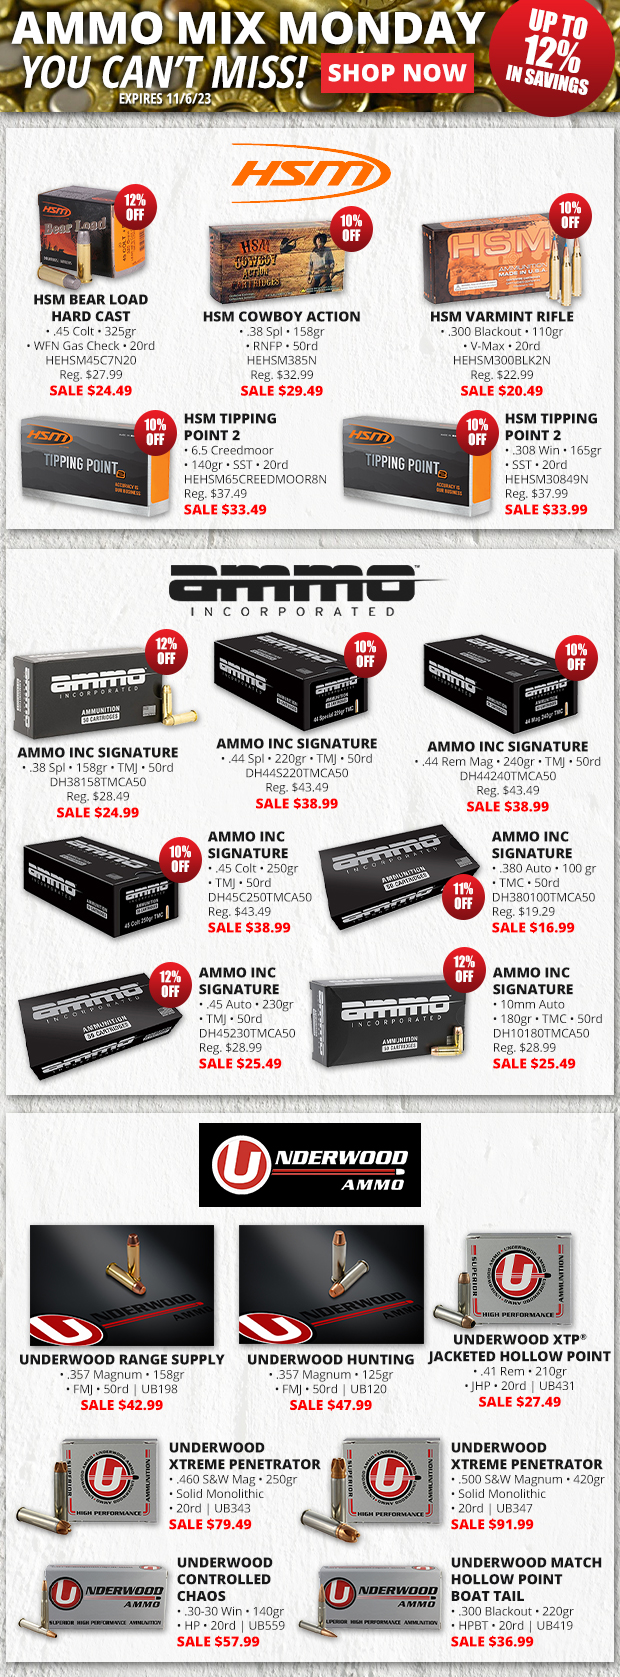 Up to 12% Off Ammo!